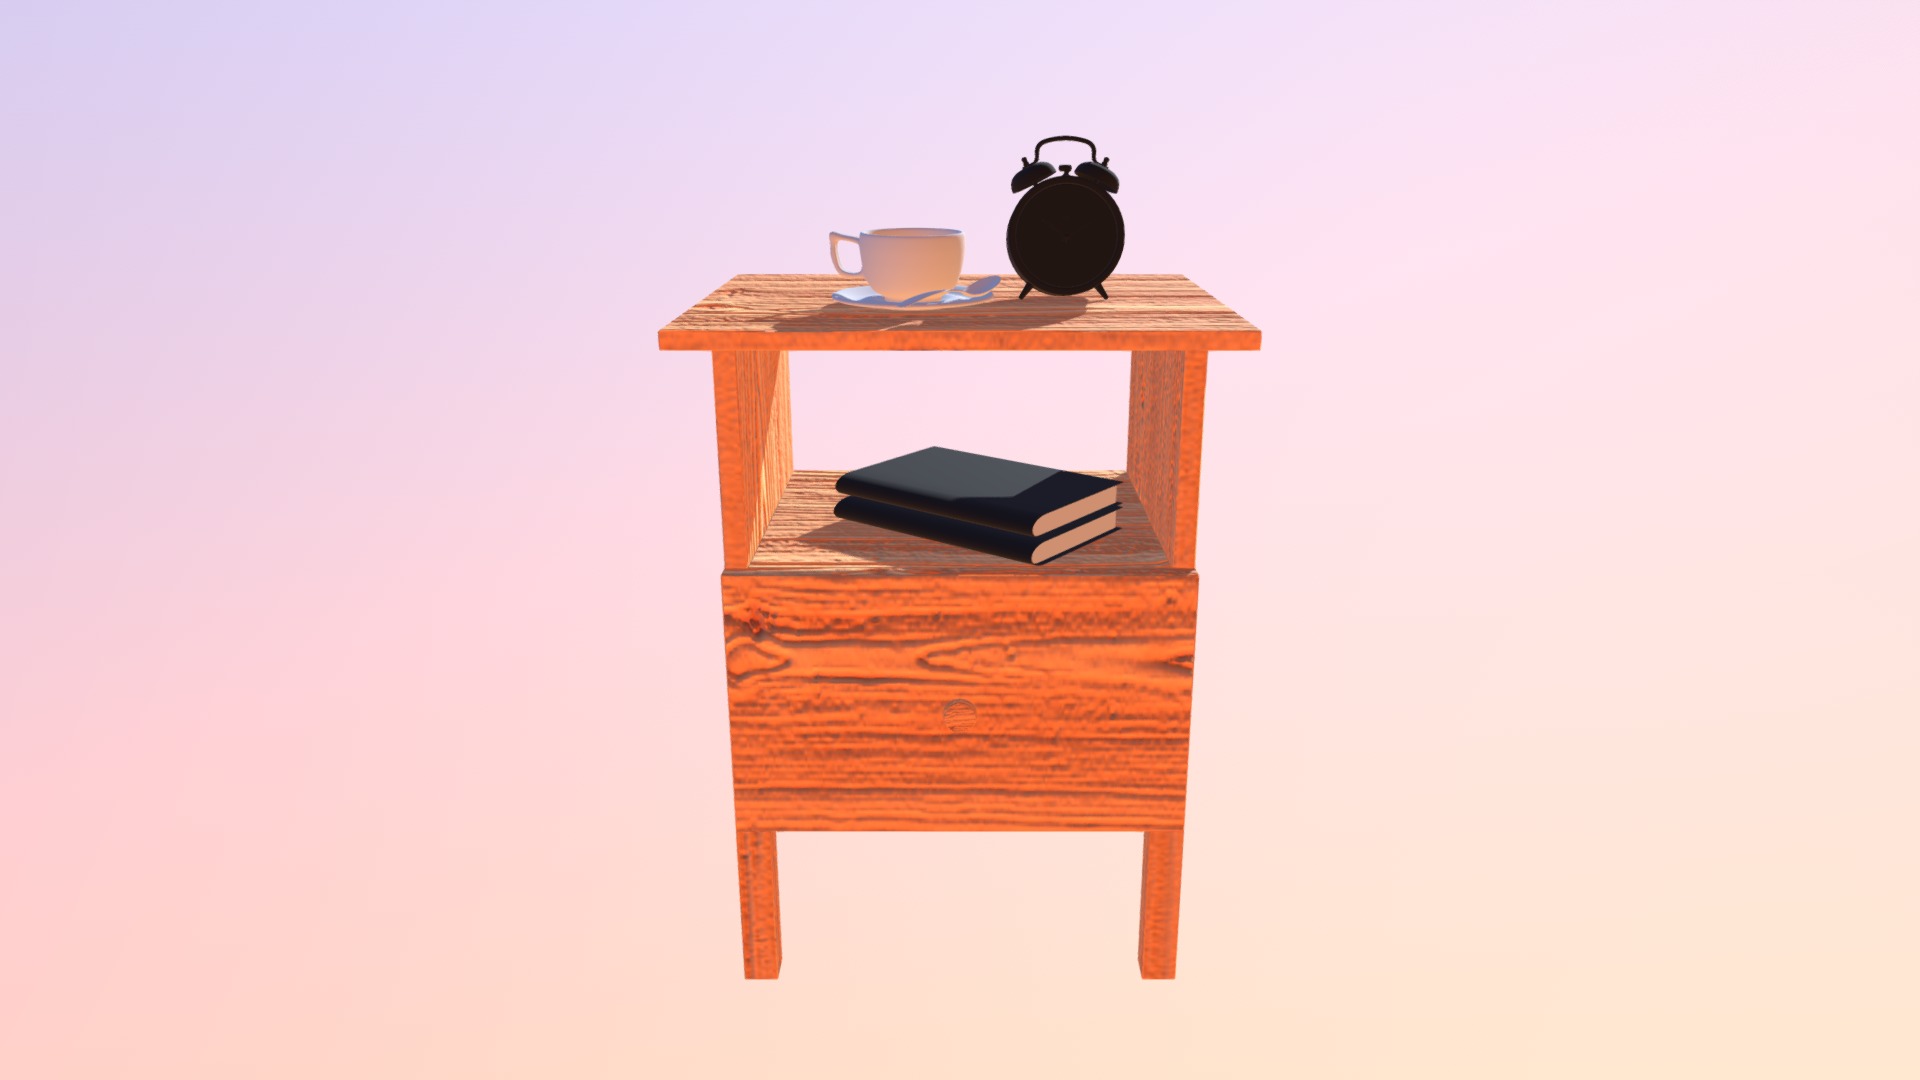 3D model IKEA tarva bedside table - This is a 3D model of the IKEA tarva bedside table. The 3D model is about a small wooden table with a book and a teapot on top.